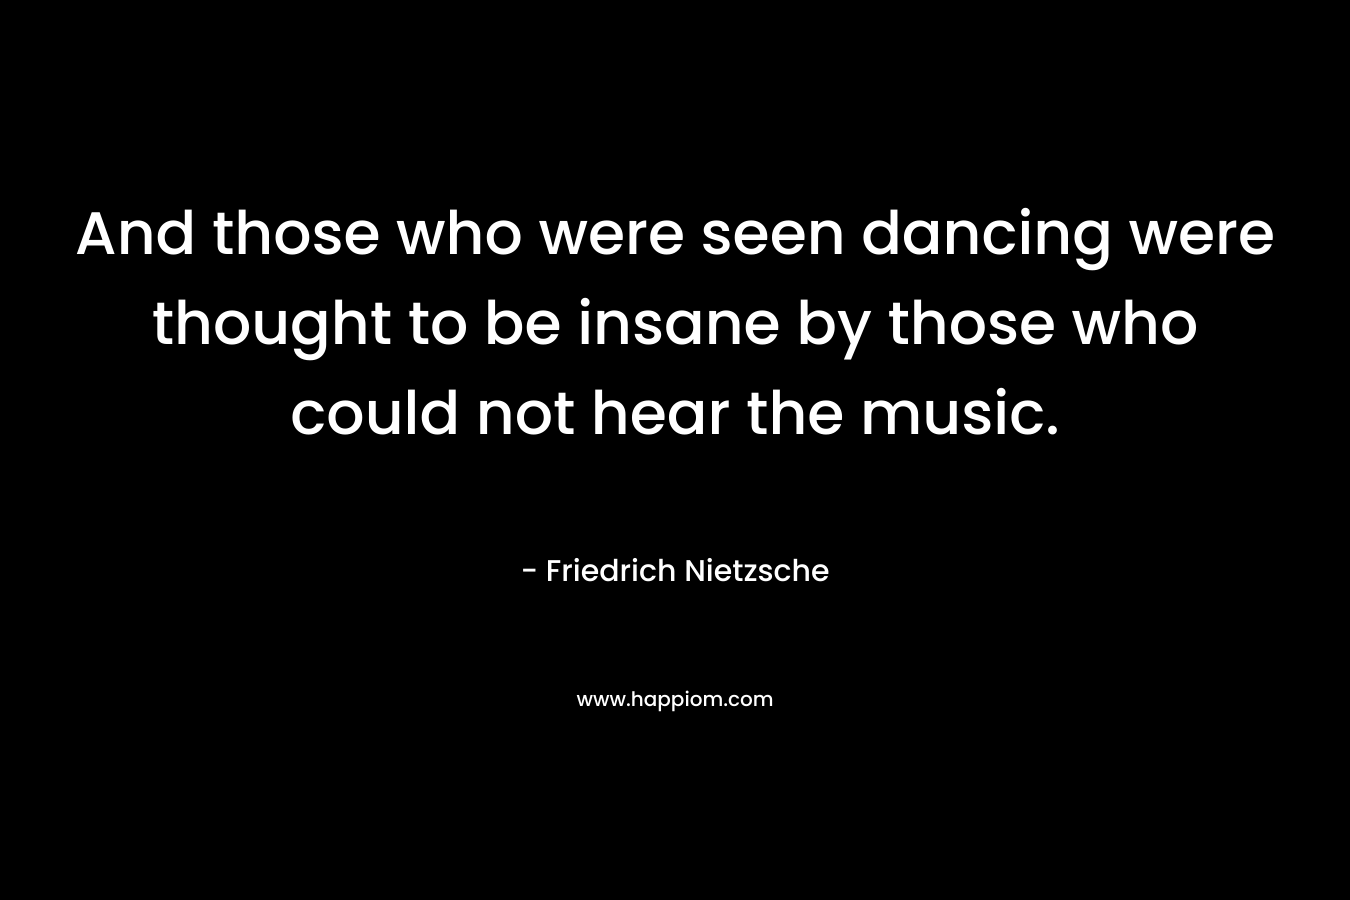 And those who were seen dancing were thought to be insane by those who could not hear the music.